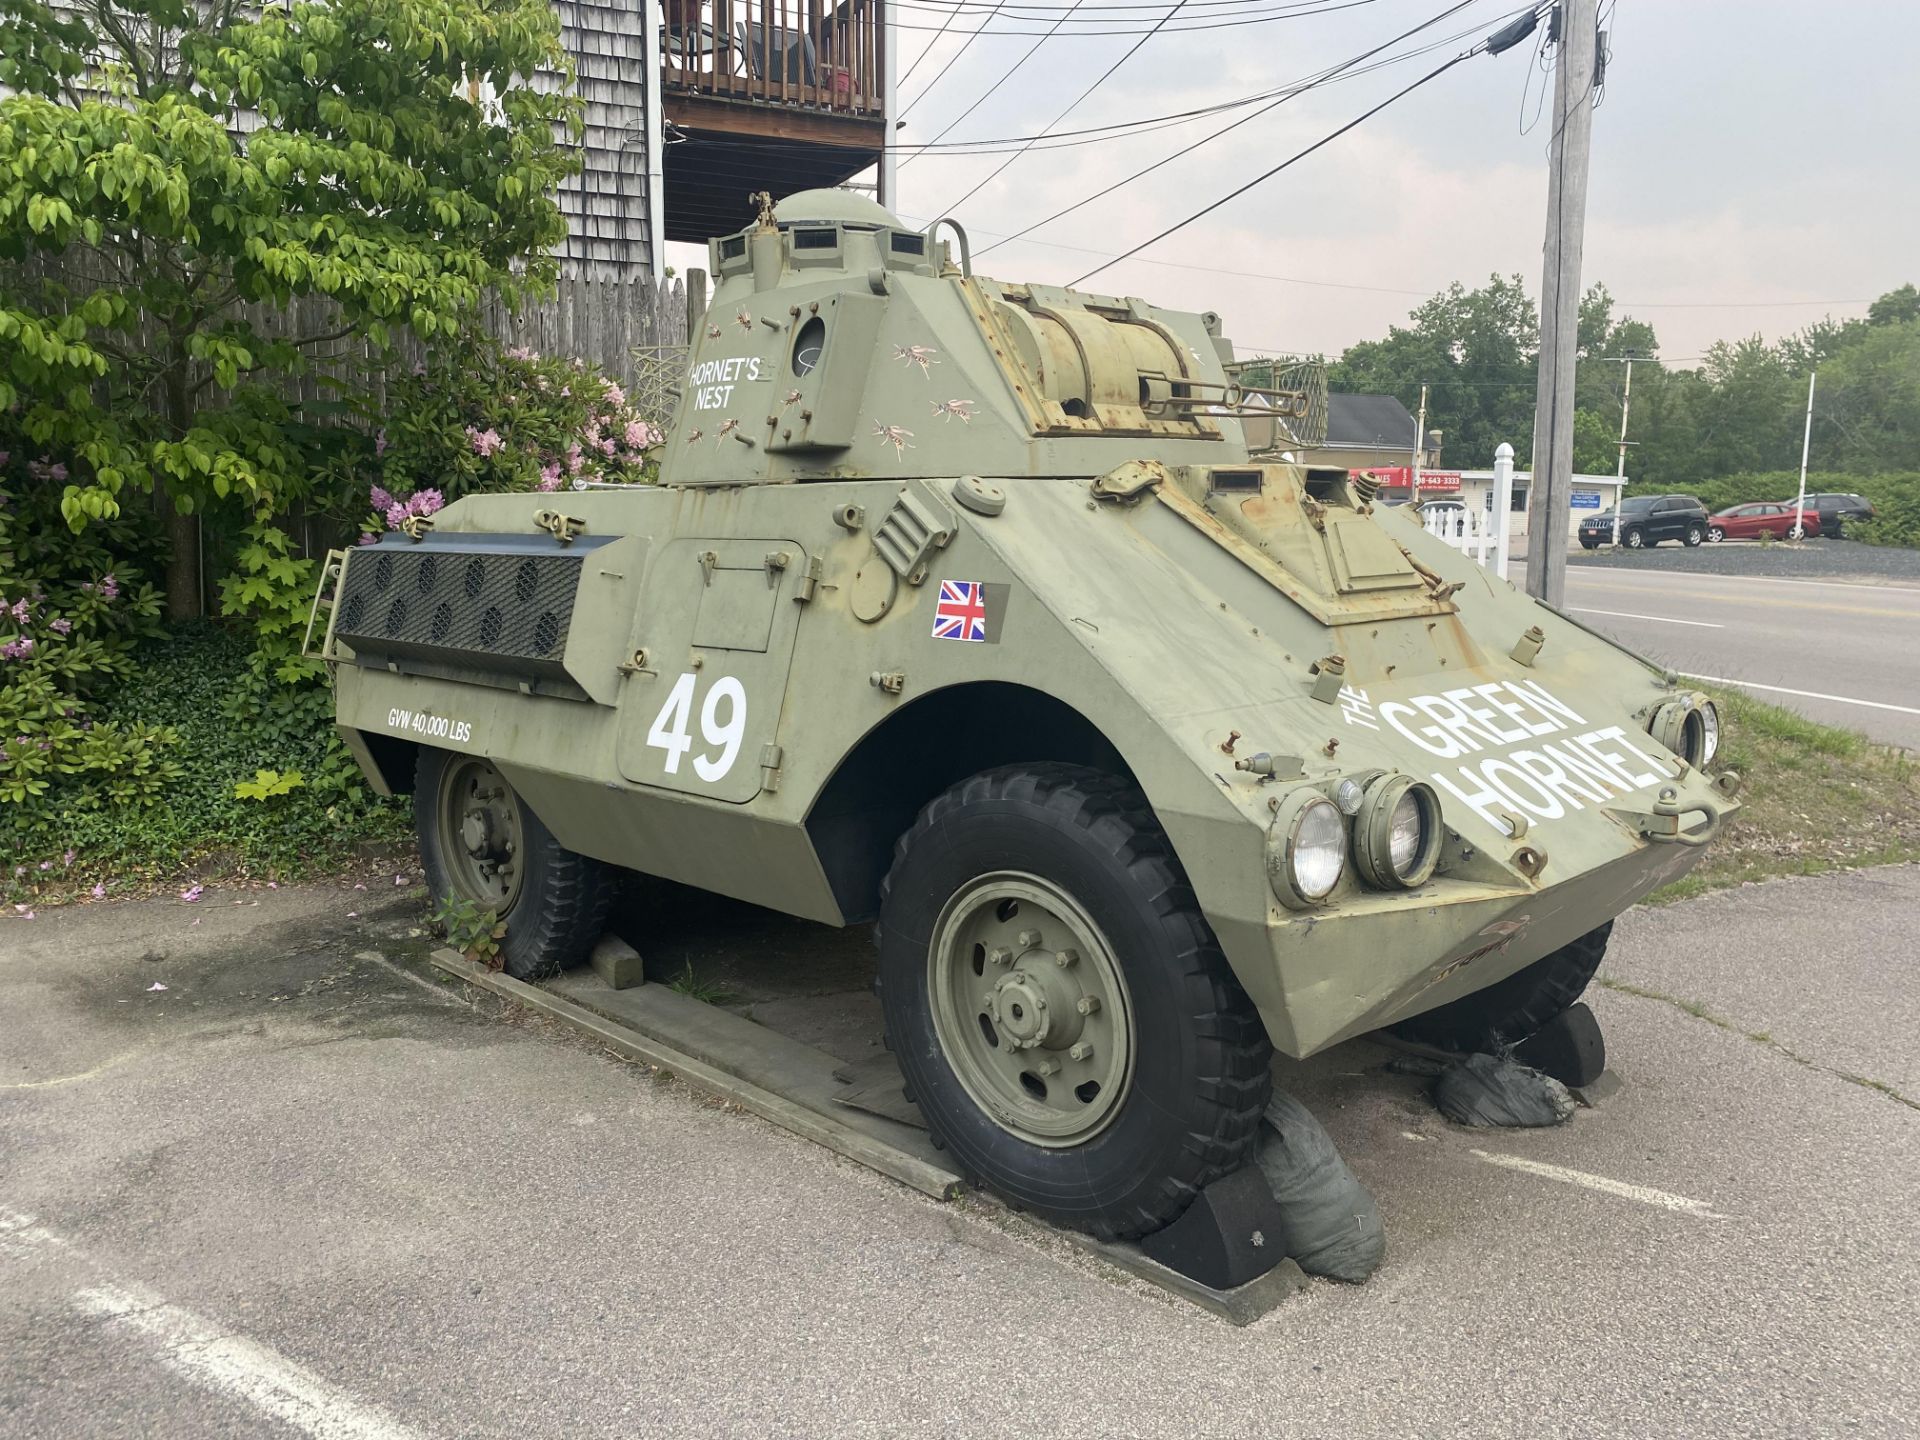 FN 4 RM 62F Armored Car As Seen in the film "Dogs of War" - Has Ford 6 Cylinder Motor and - Image 3 of 16